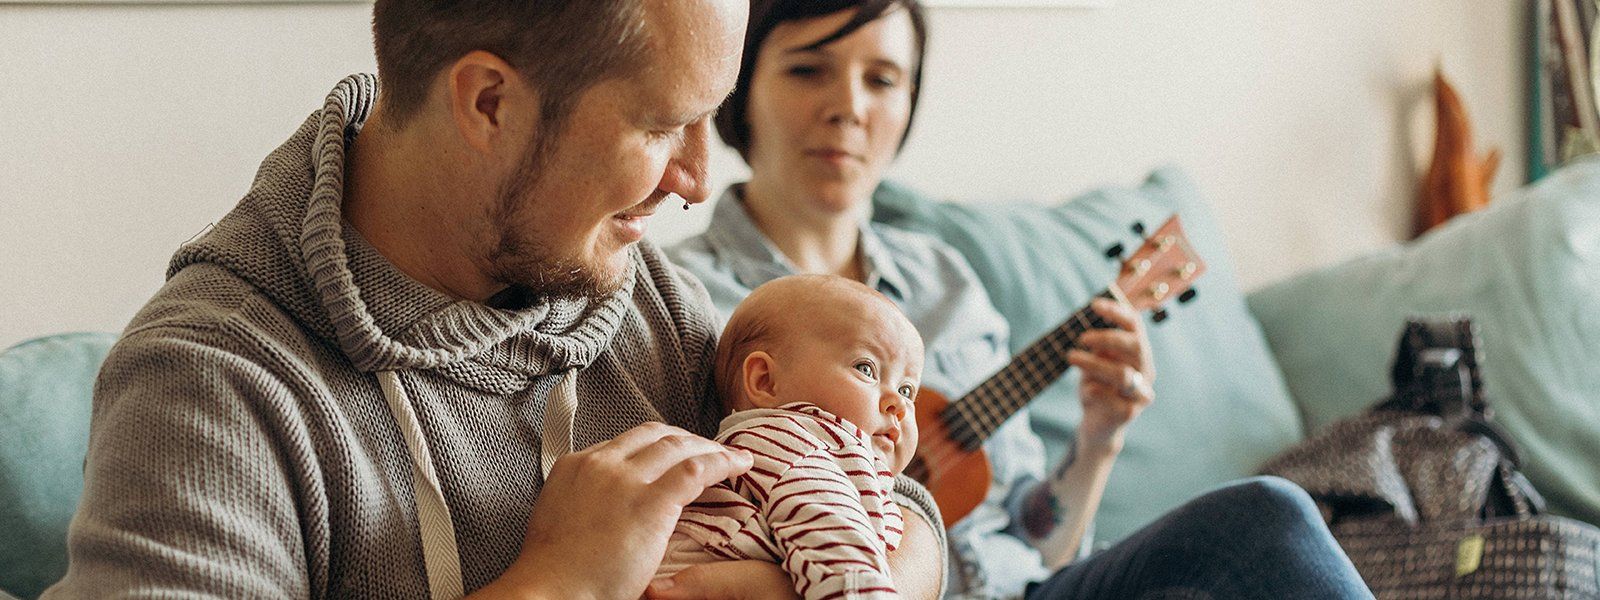 Five Ways to Support a Family With a Newborn